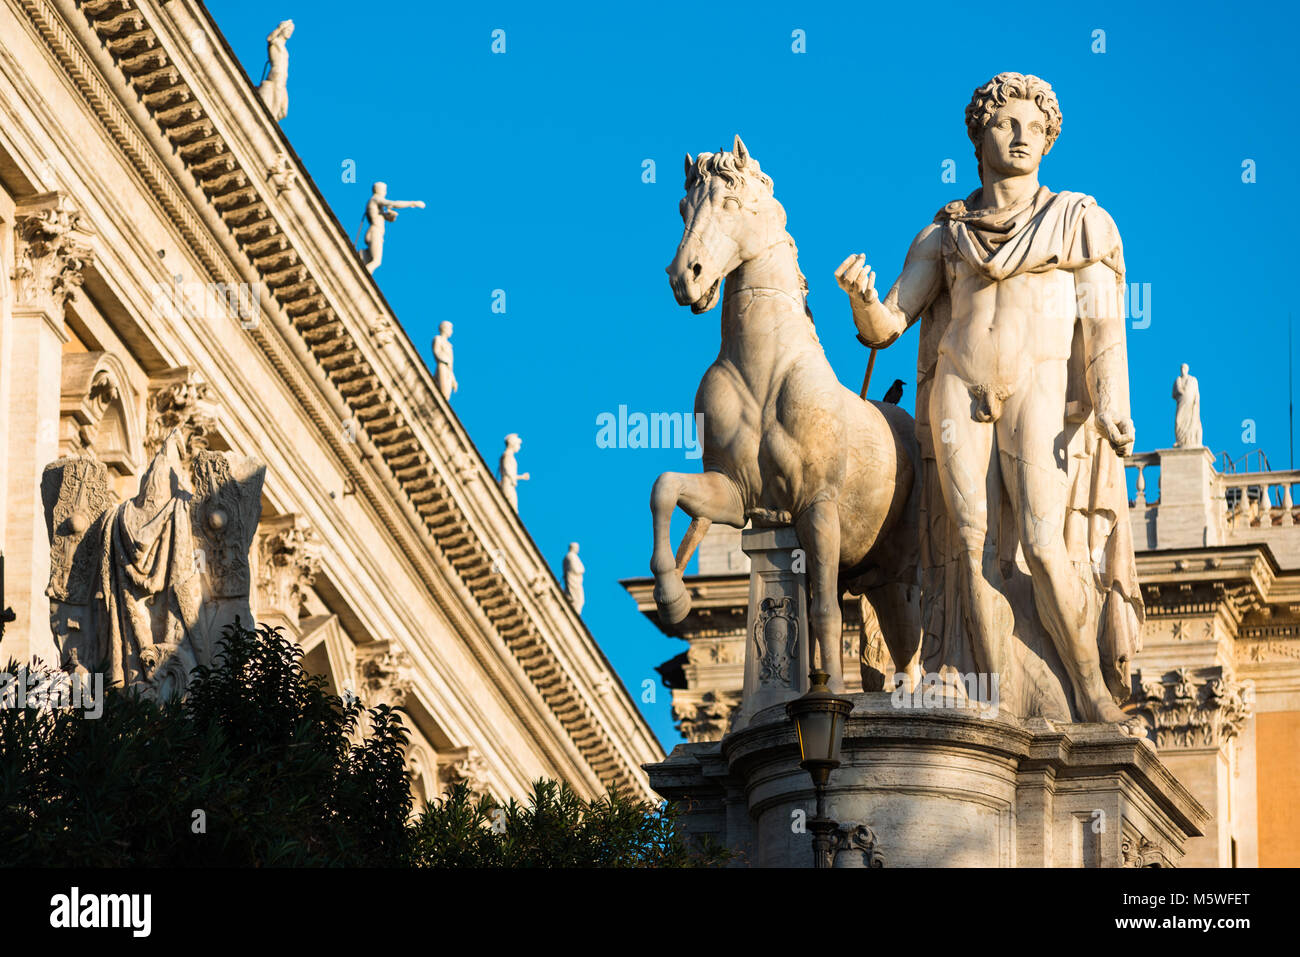 One of the two dioscuri (Gemini twins - or Castor and Pollux) statues on the Capitoline Hill in Rome. Stock Photo